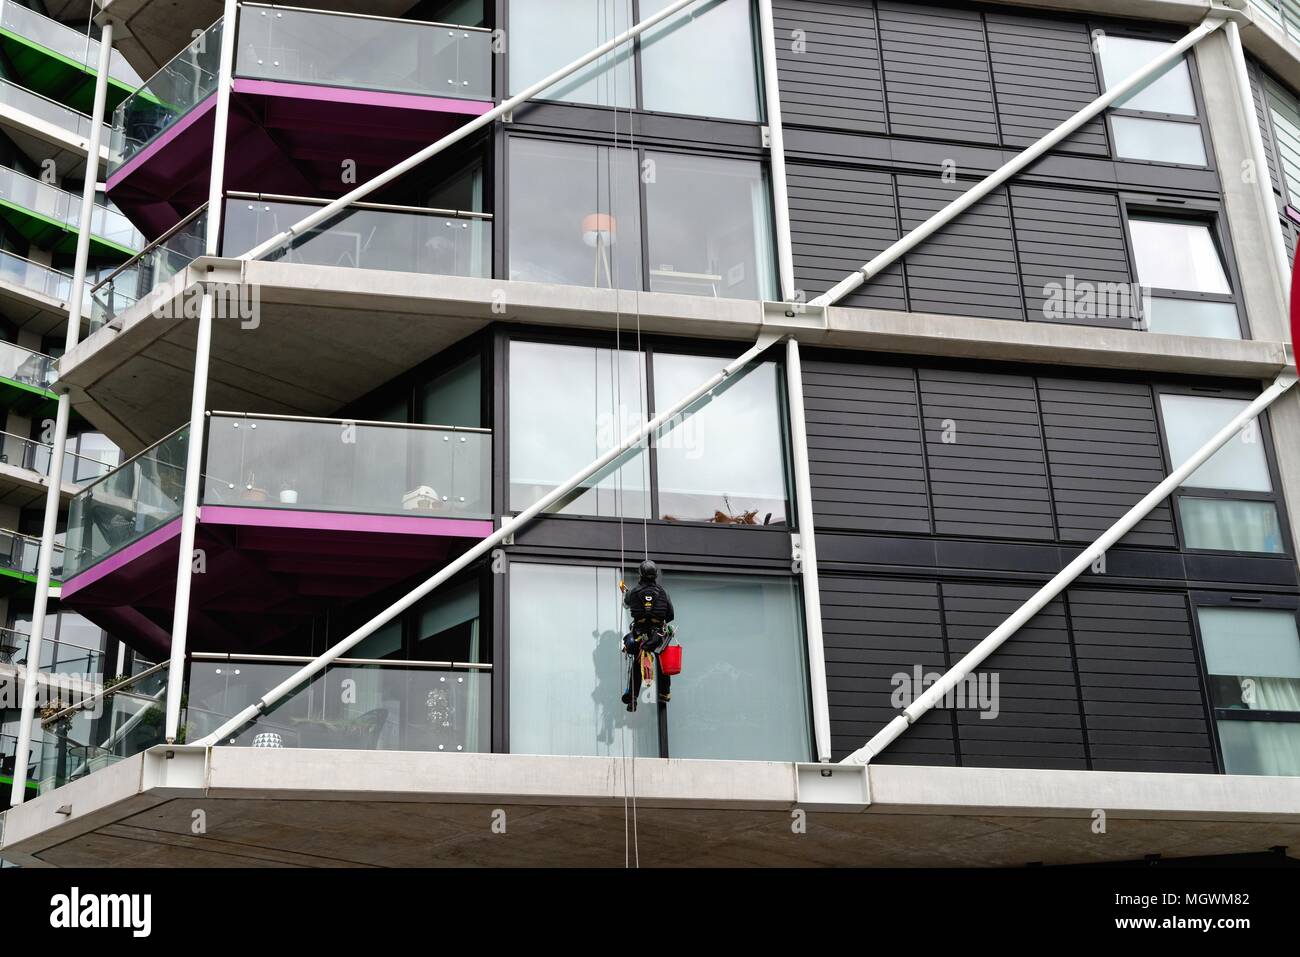 Window cleaner abseiling on modern block of apartments cleaning windows Battersea London England UK Stock Photo